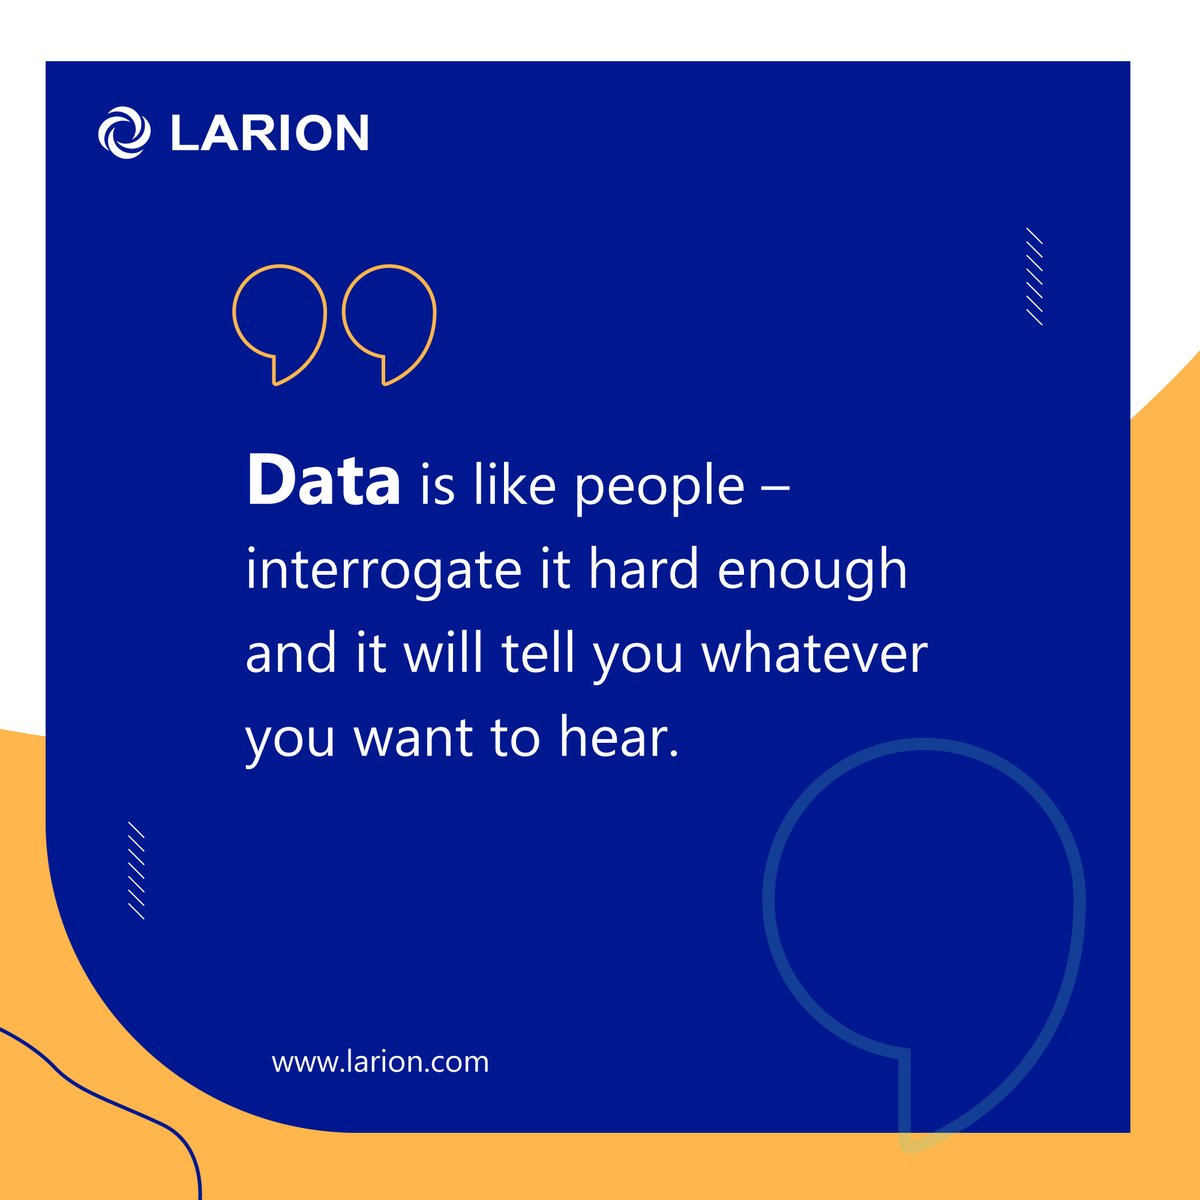 If you need help, we #LARIONJSC is always here for #dataservice
 _________________ 
LARION CONSULTING AND SOFTWARE DEVELOPMENT  
Hotline: (+84) 909 906 758 
Website: larion.com 
Email: marketing@larion.com